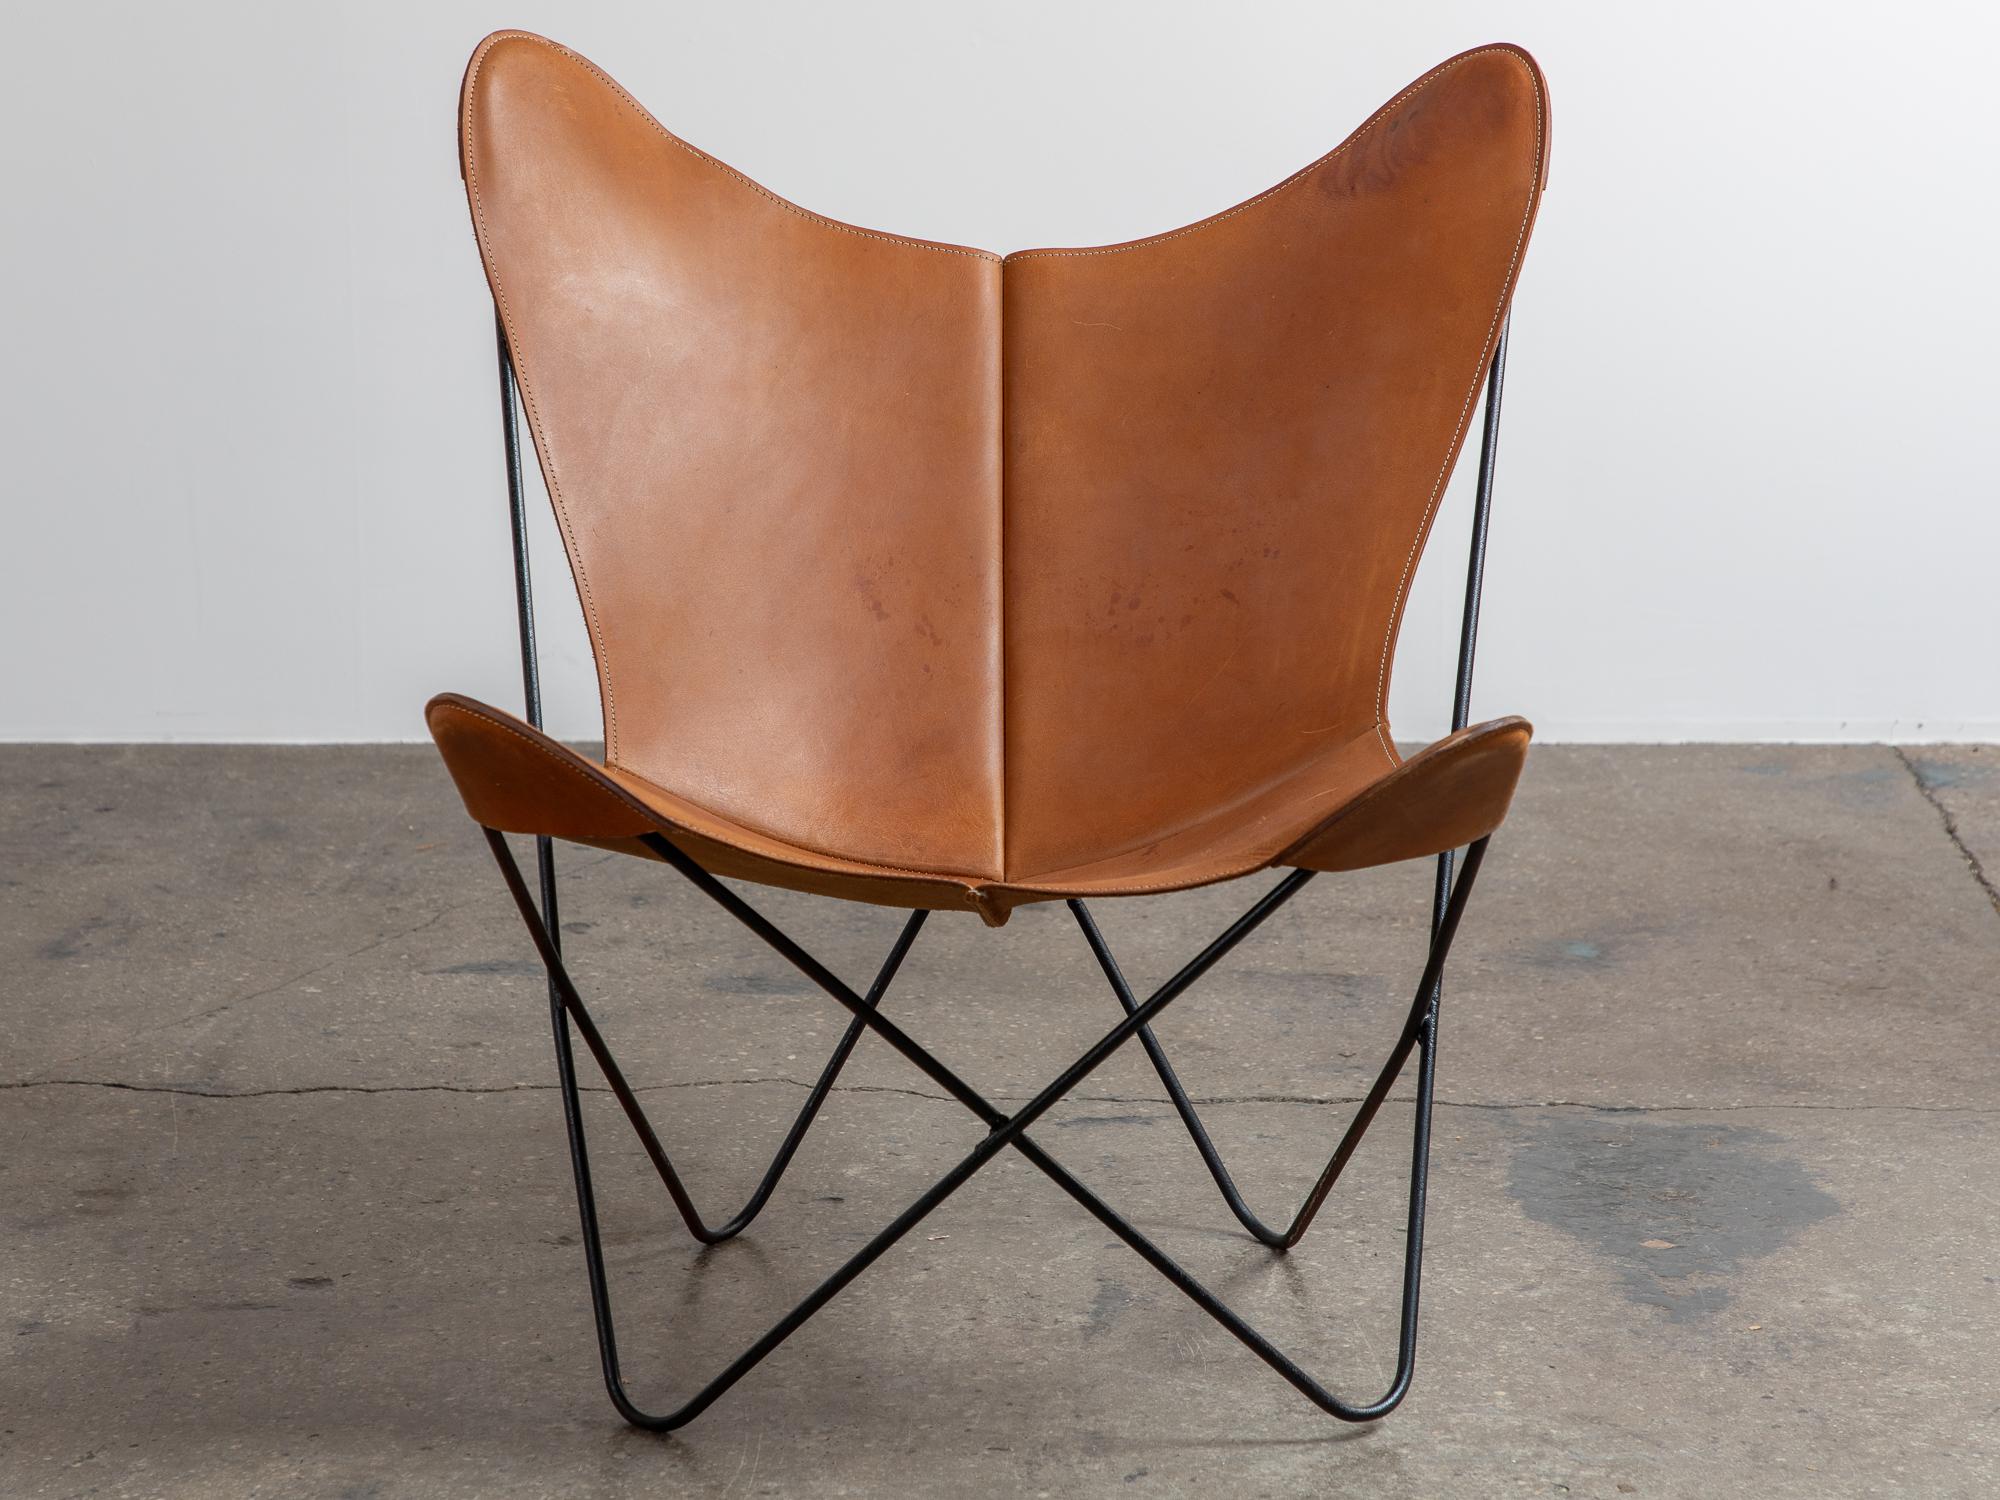 Mid-20th Century Original Cognac Leather Hardoy Butterfly Chair, Issued by Knoll, 1950s For Sale